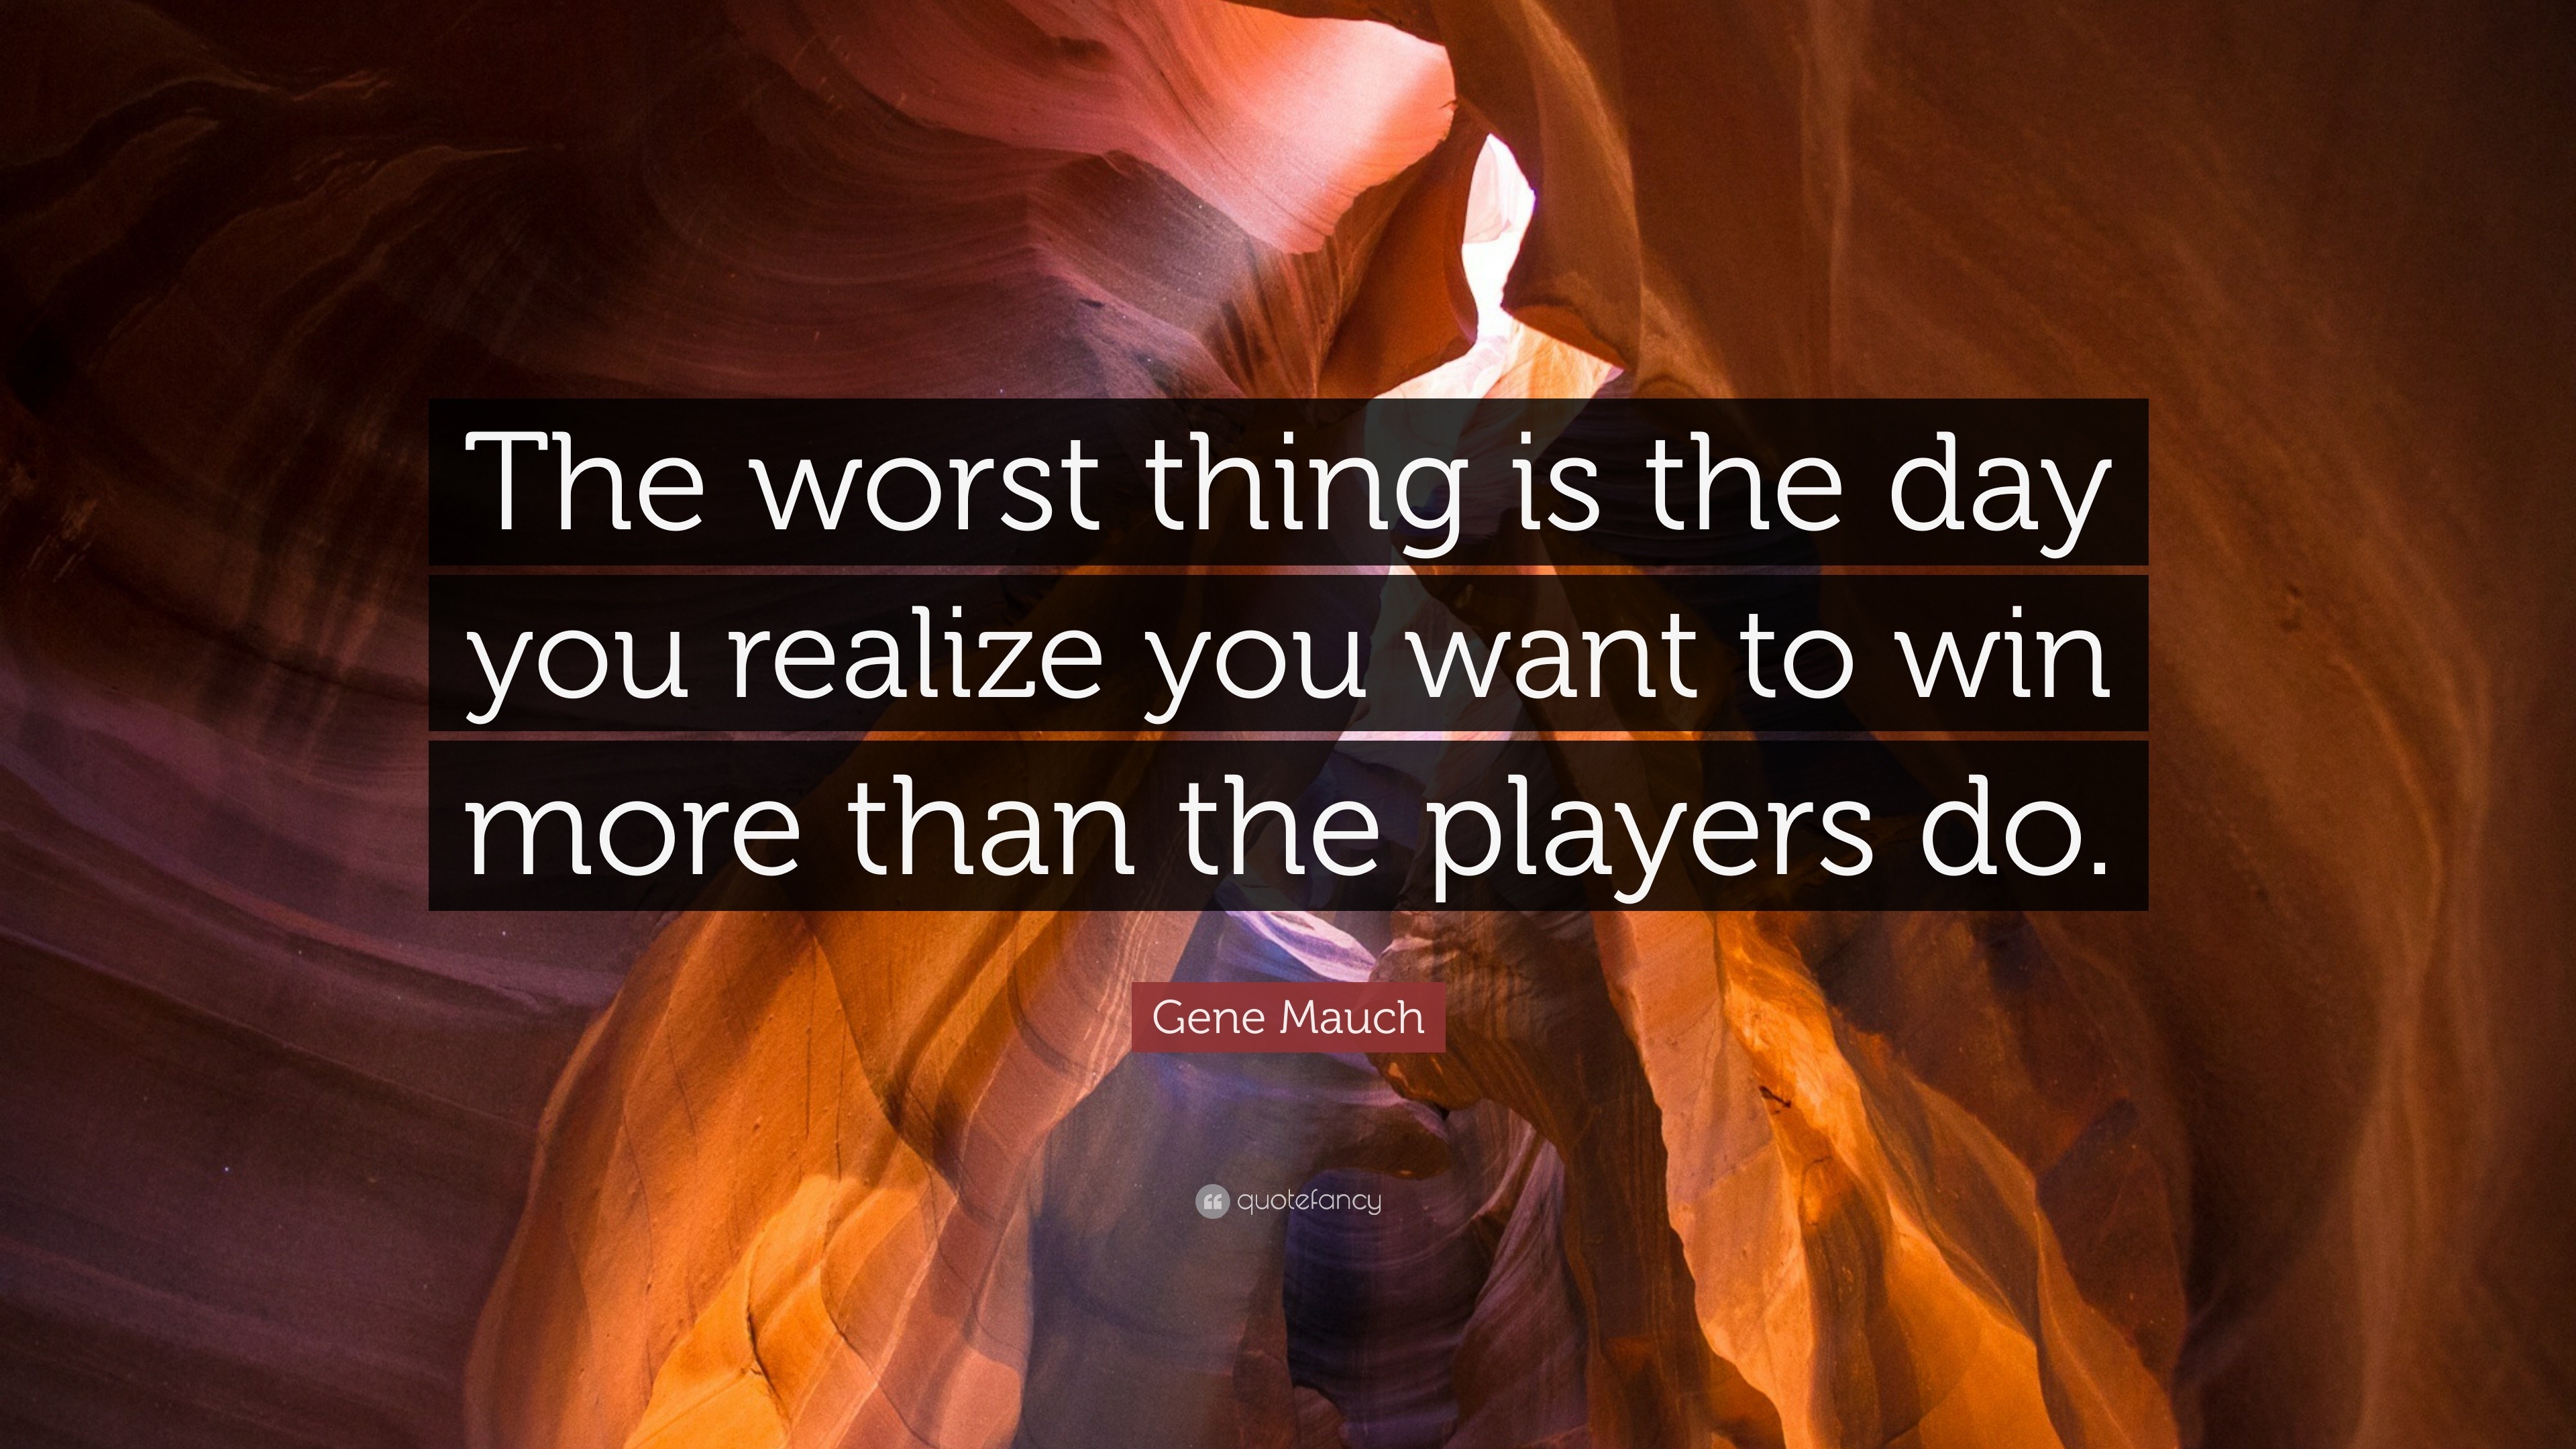 Gene Mauch Quote: “The worst thing is the day you realize you want to ...